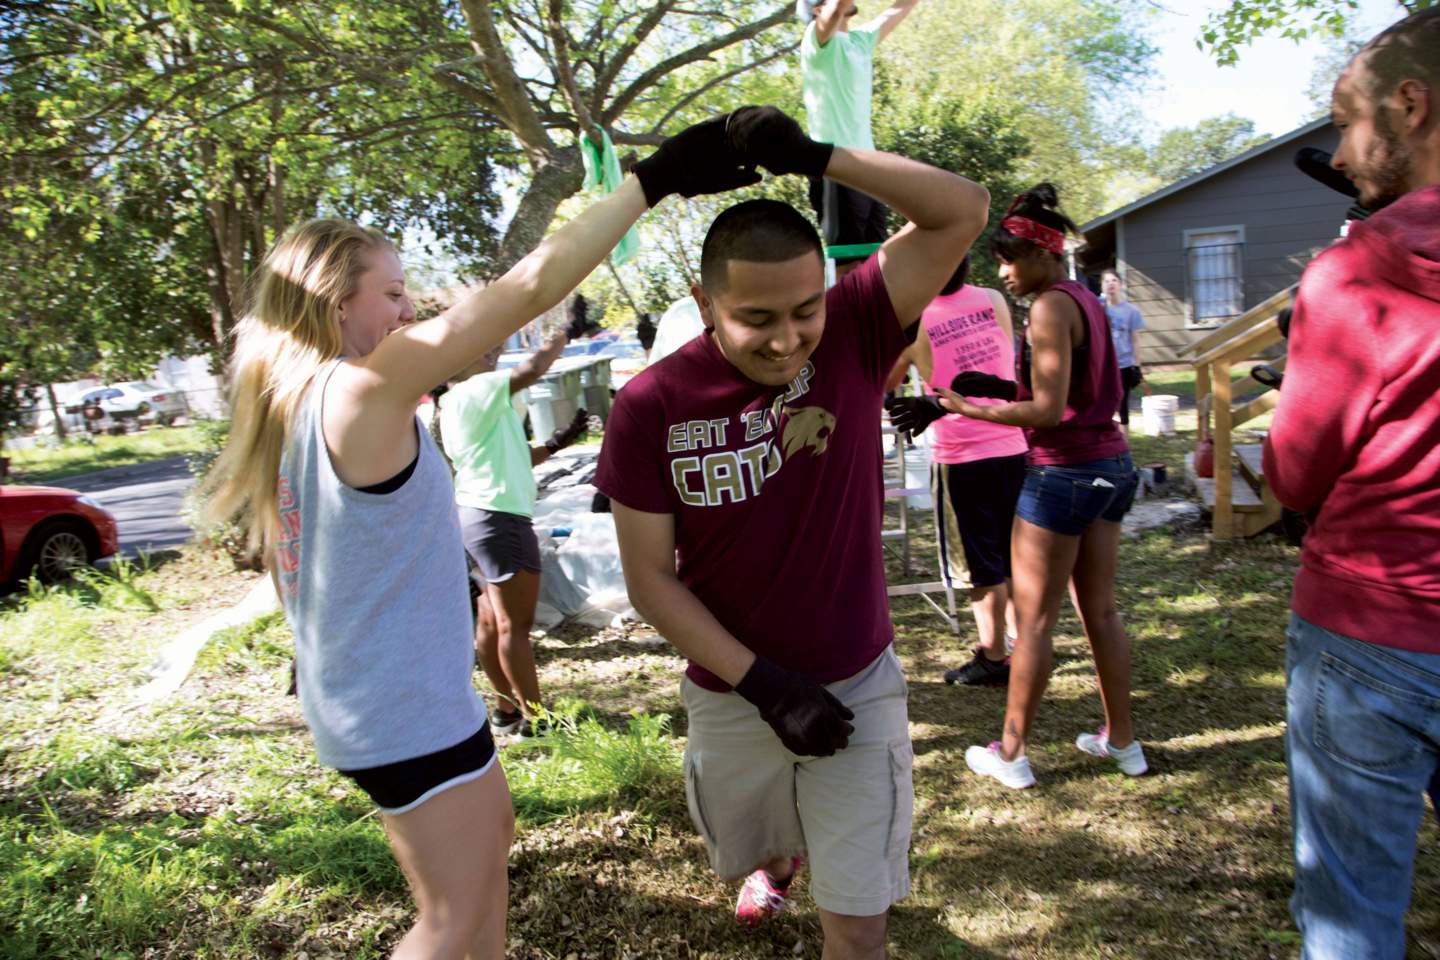 Students dance and play during a campus clean-up event